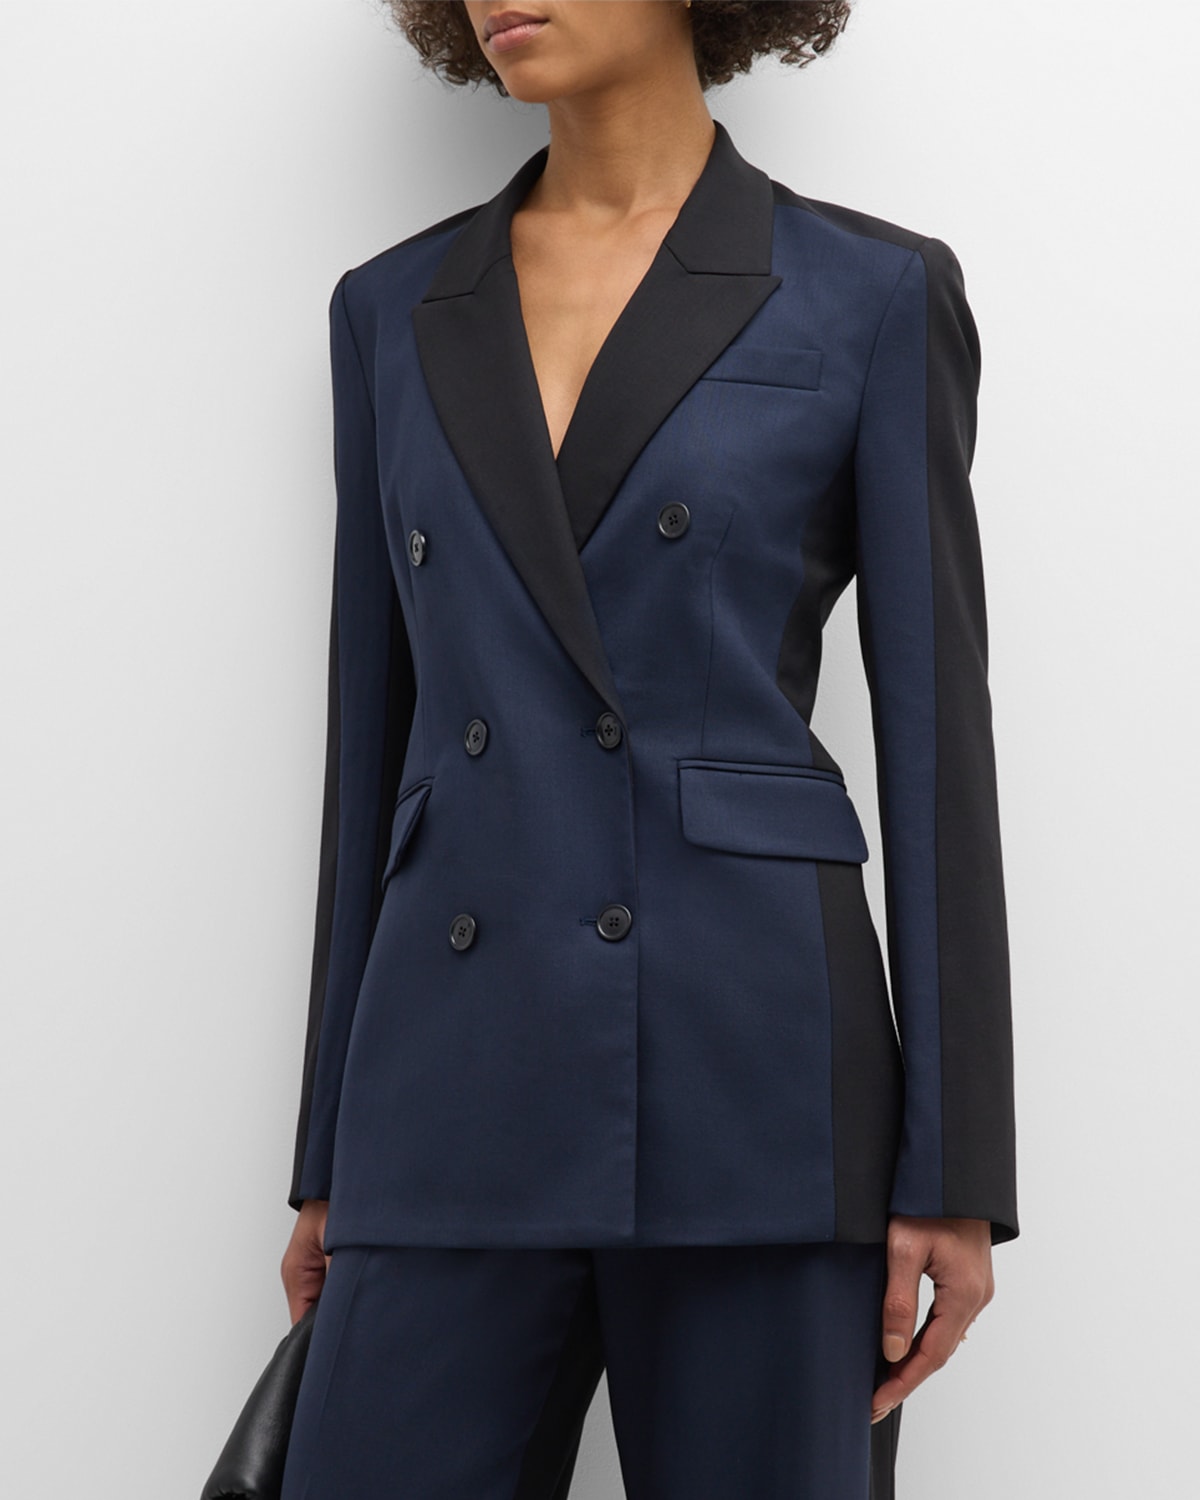 ARGENT DOUBLE-BREASTED COLORBLOCK WOOL BLAZER